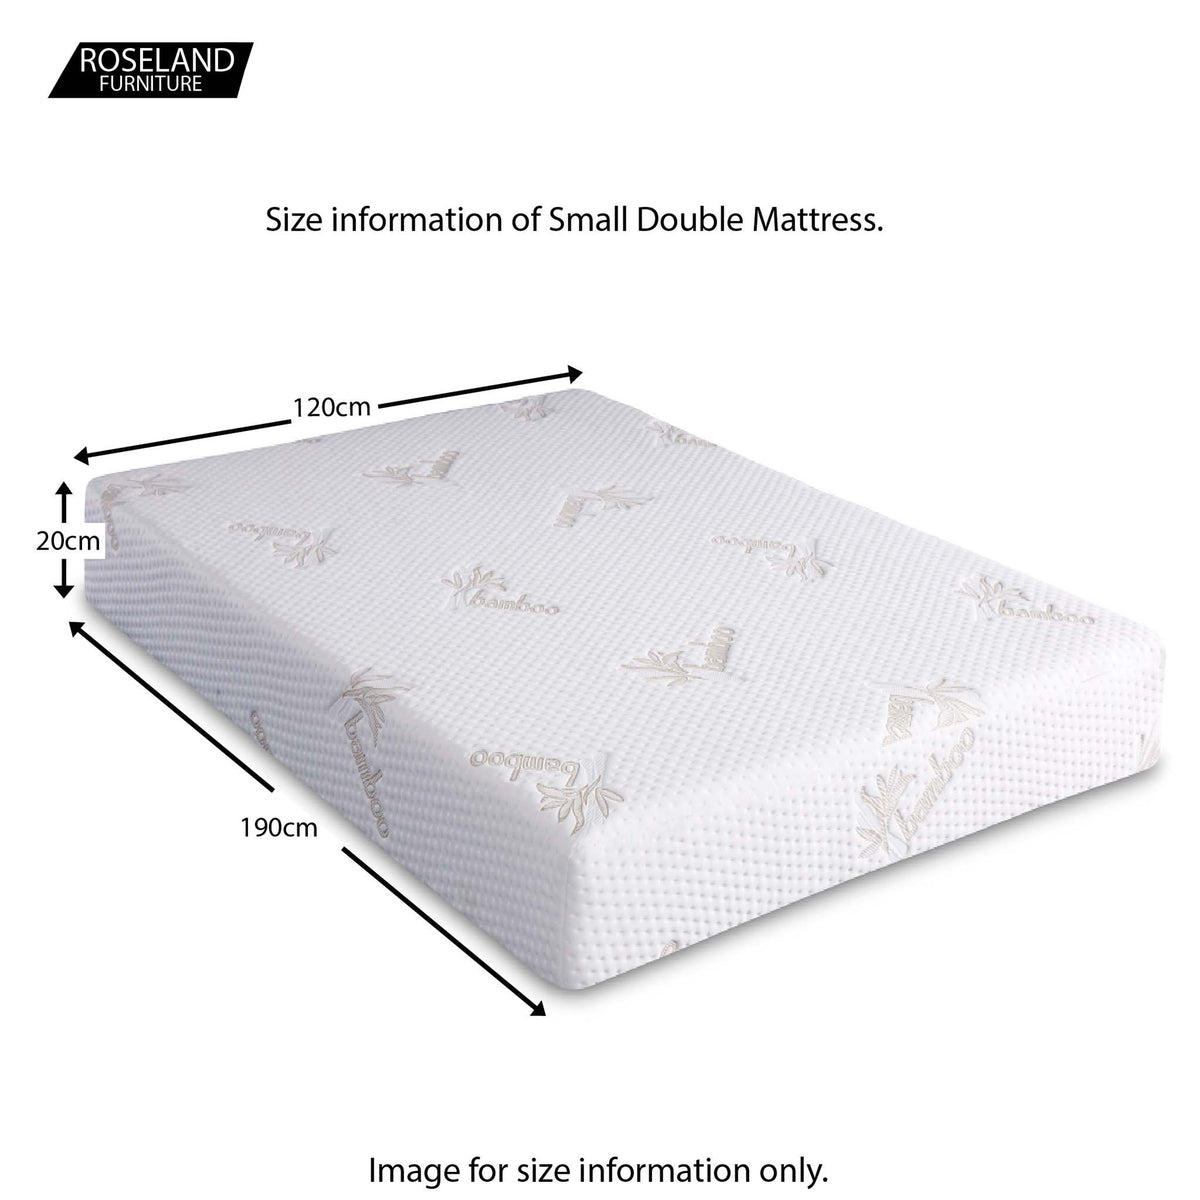 MemoryPedic Pocket Spring Memory 1000 Foam Mattress - adult 4ft small double size guide